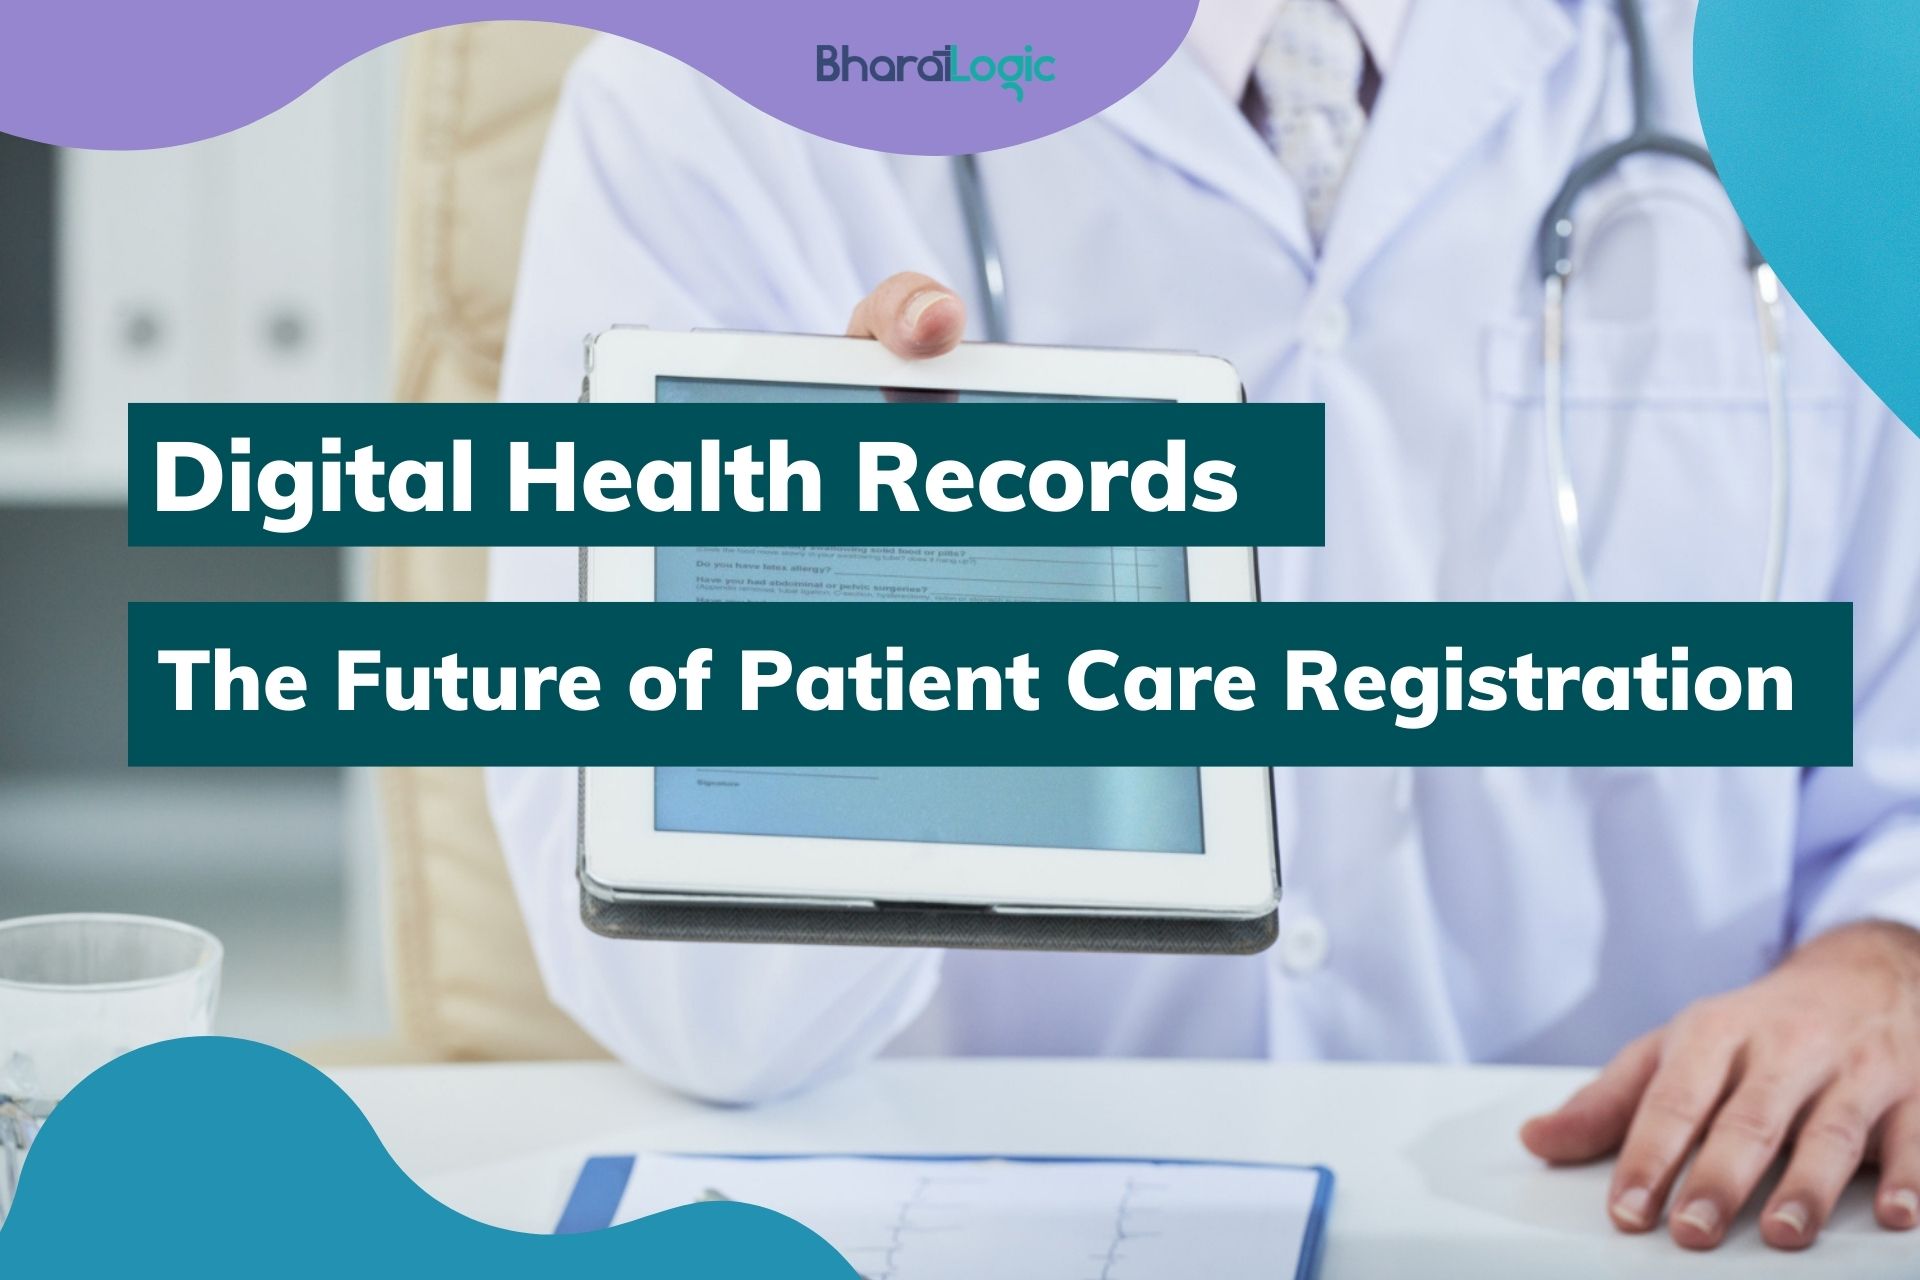 Digital Health Records: The Future of Patient Care